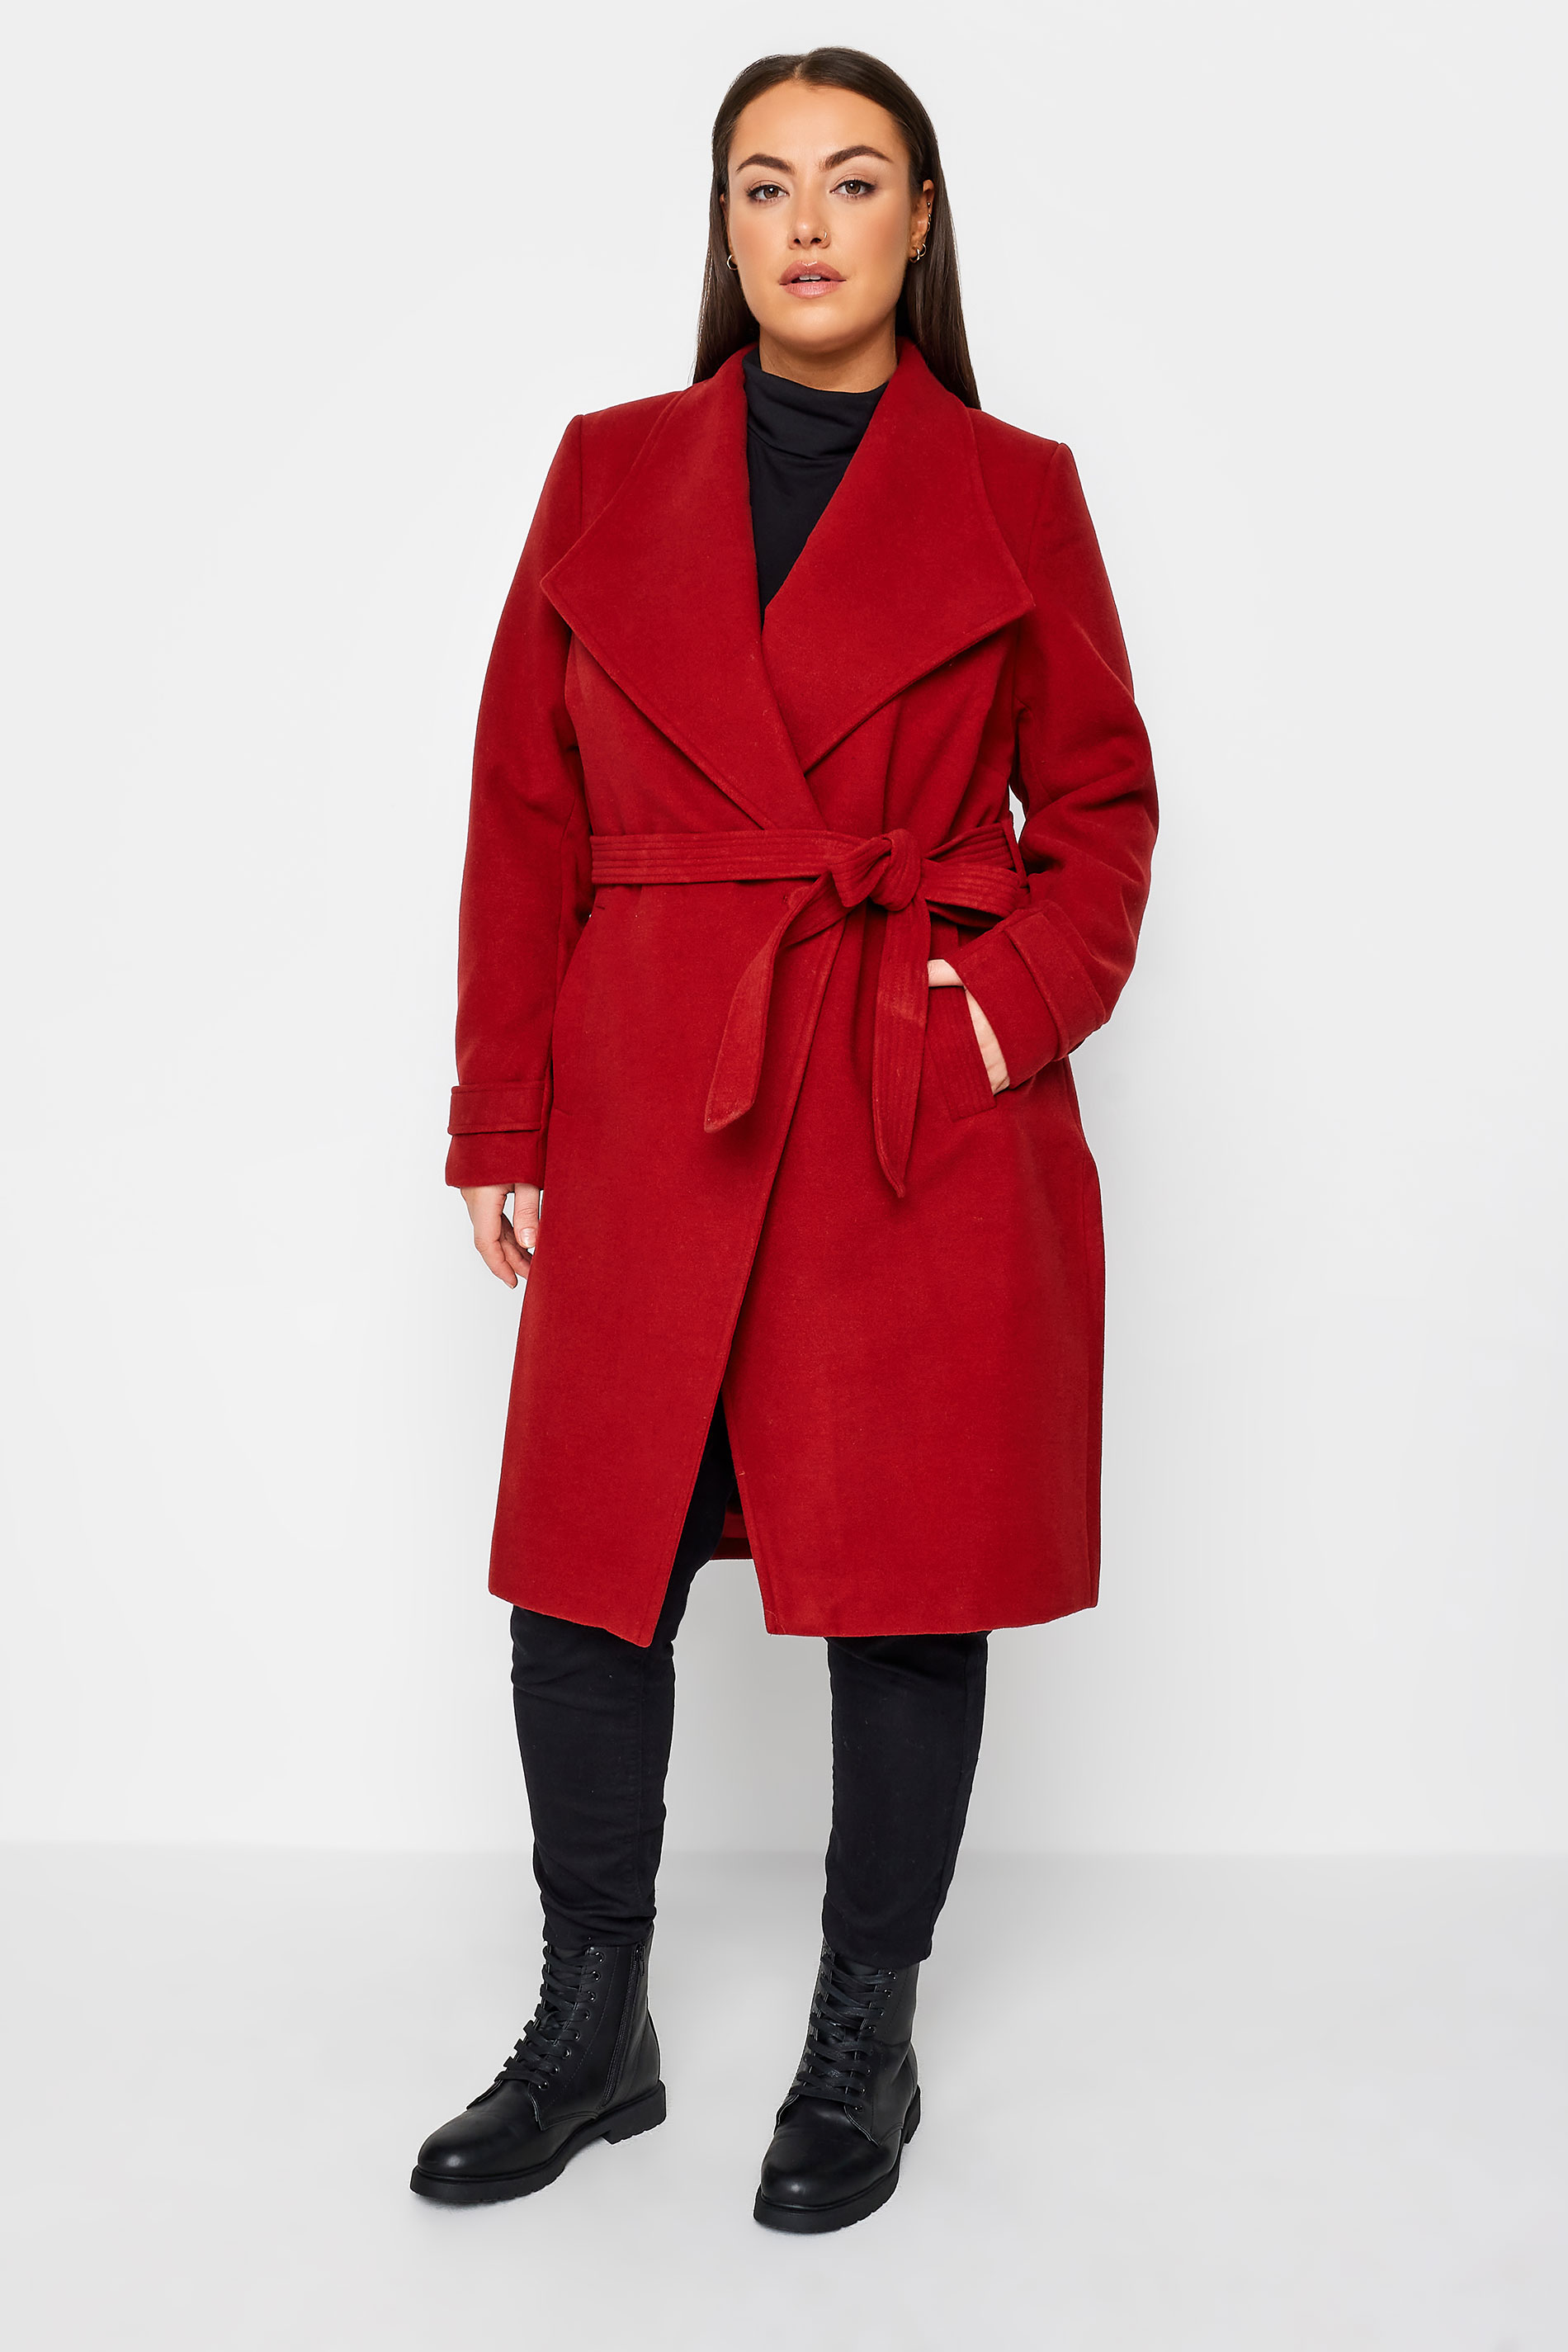 City Chic Red Belted Coat 1